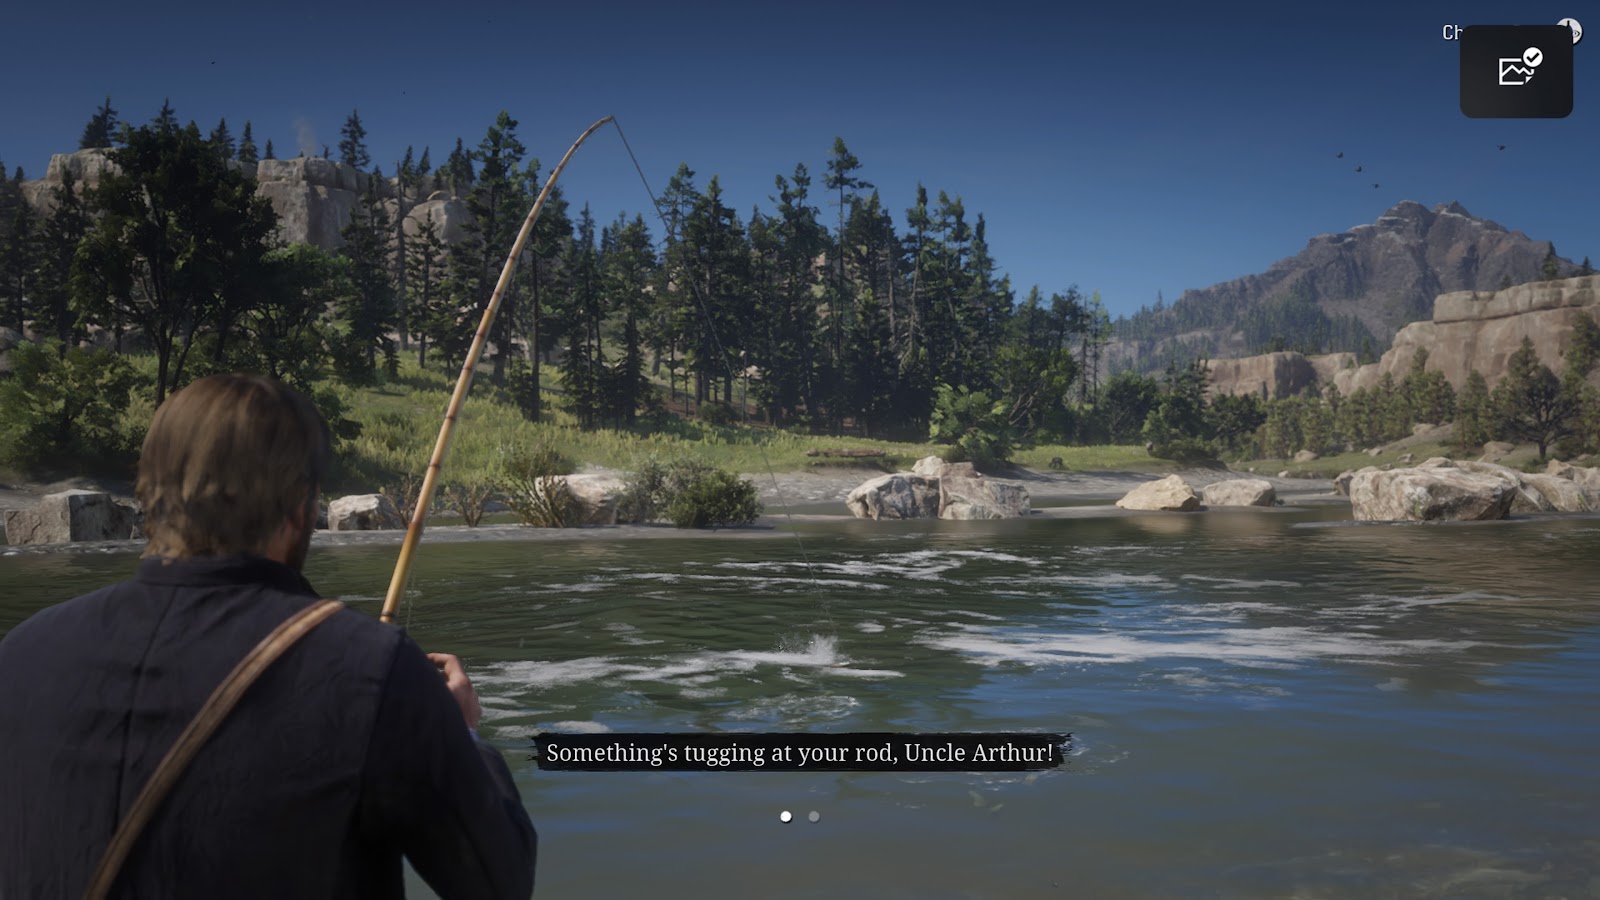 A Deep Dive Look into Fishing Minigames – The Story Arc